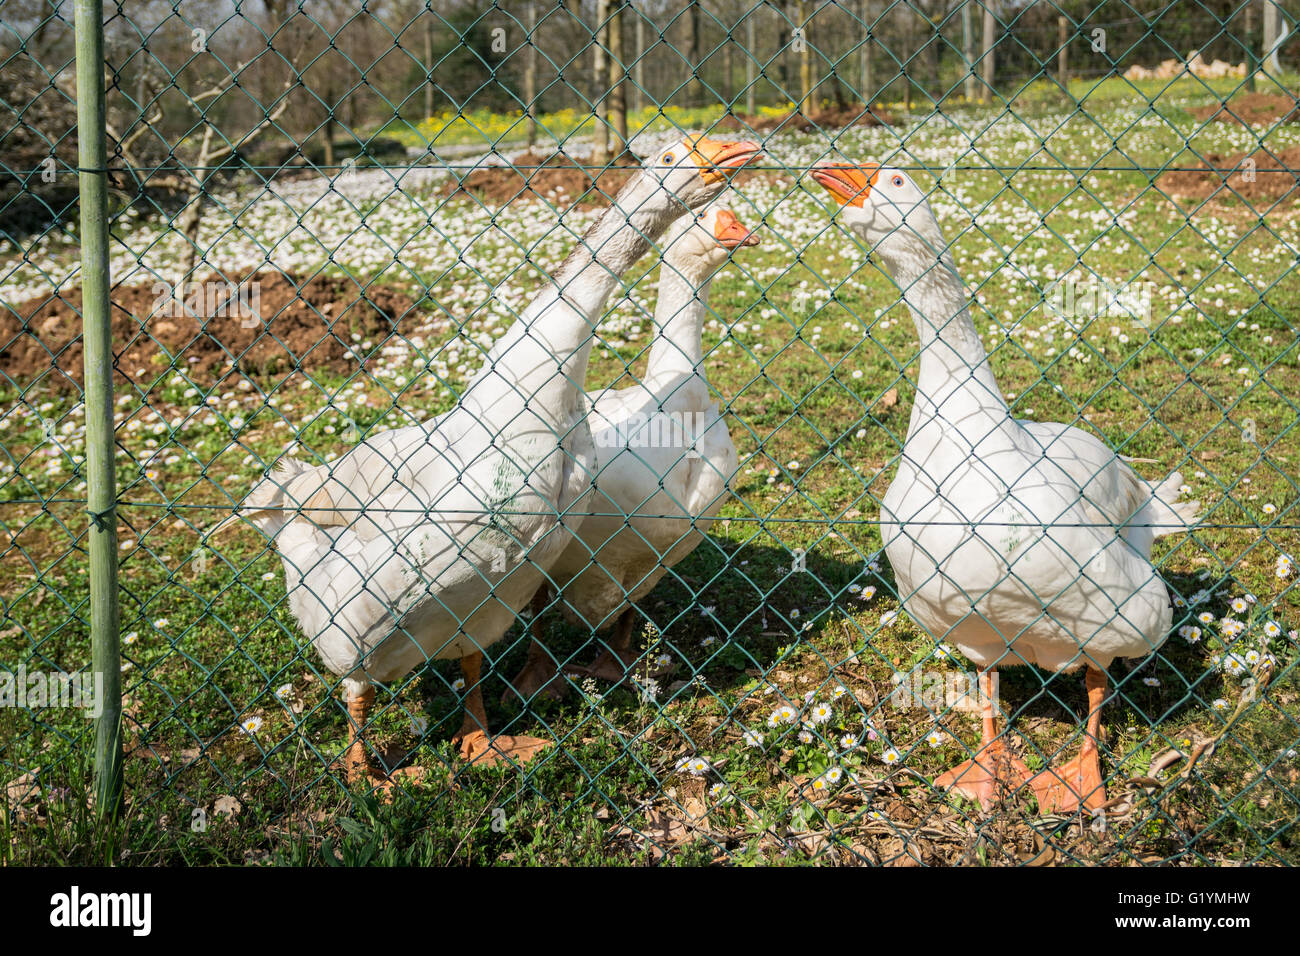 Three white geese observe curious behind a metal fence. Stock Photo